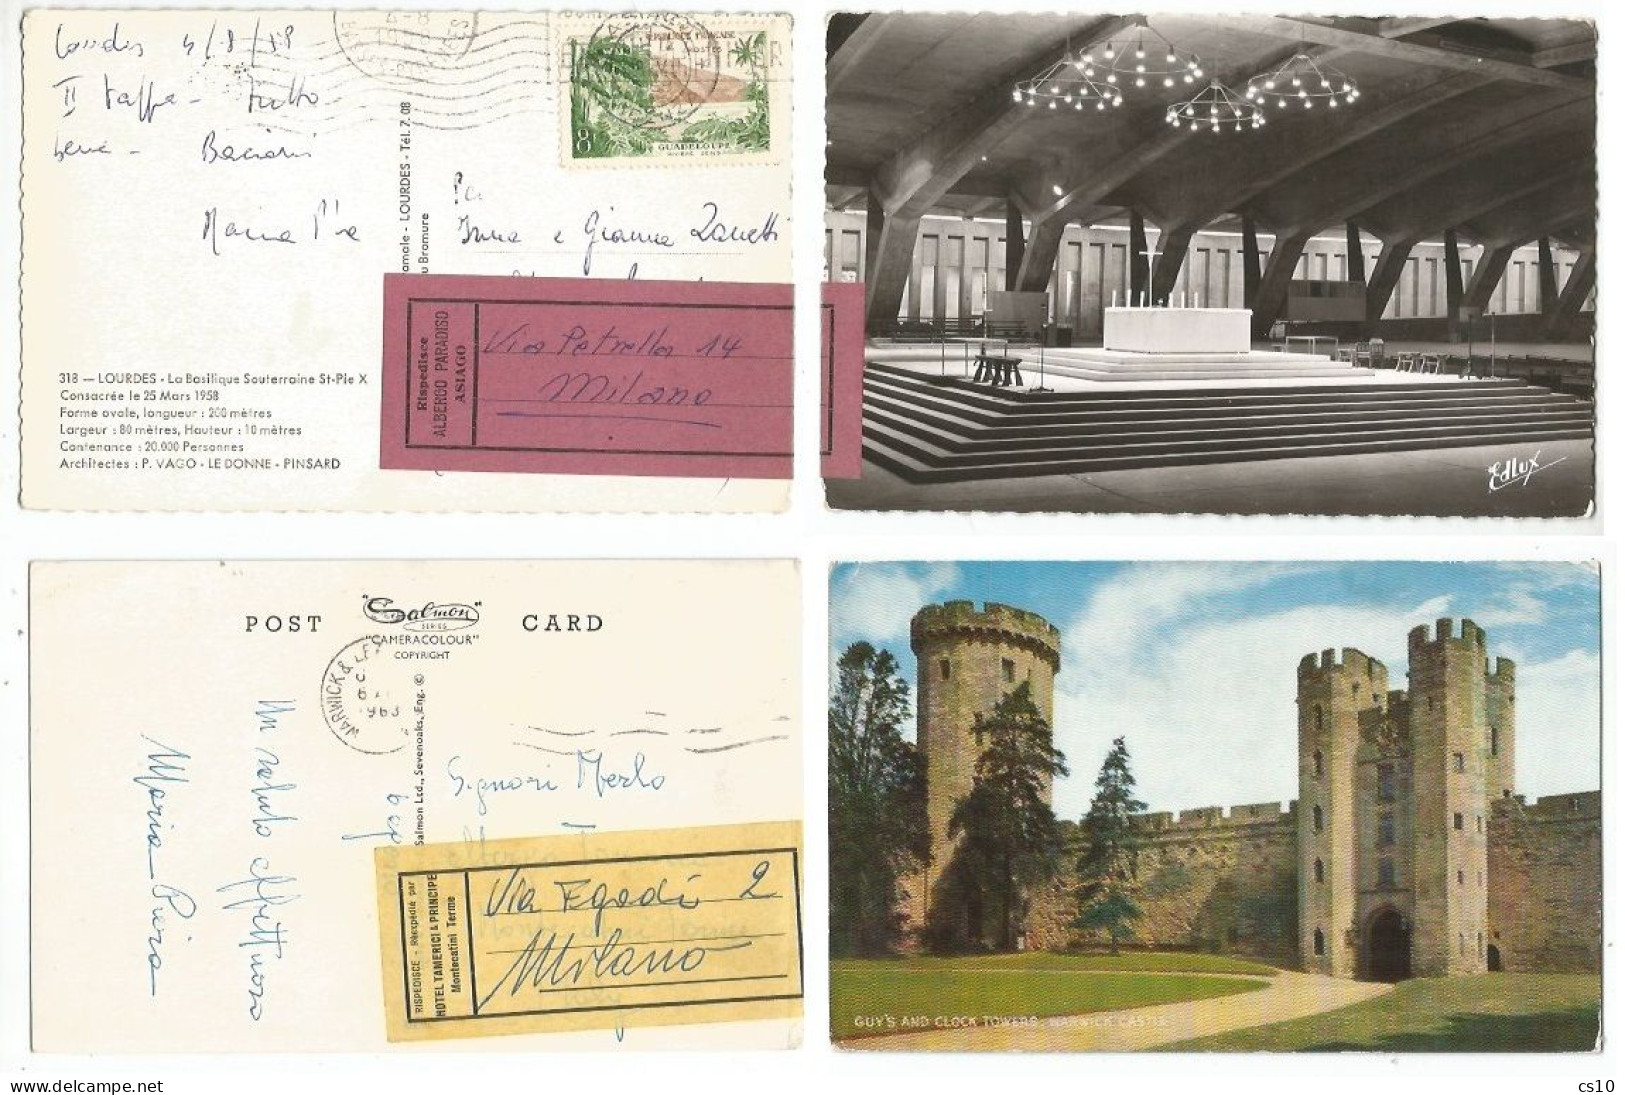 Hotel Mail Forwarding Labels # 2 Pcards From UK & France By 2 Different Italy Hotels Asiago 1958 & Montecatini Terme '63 - Posta